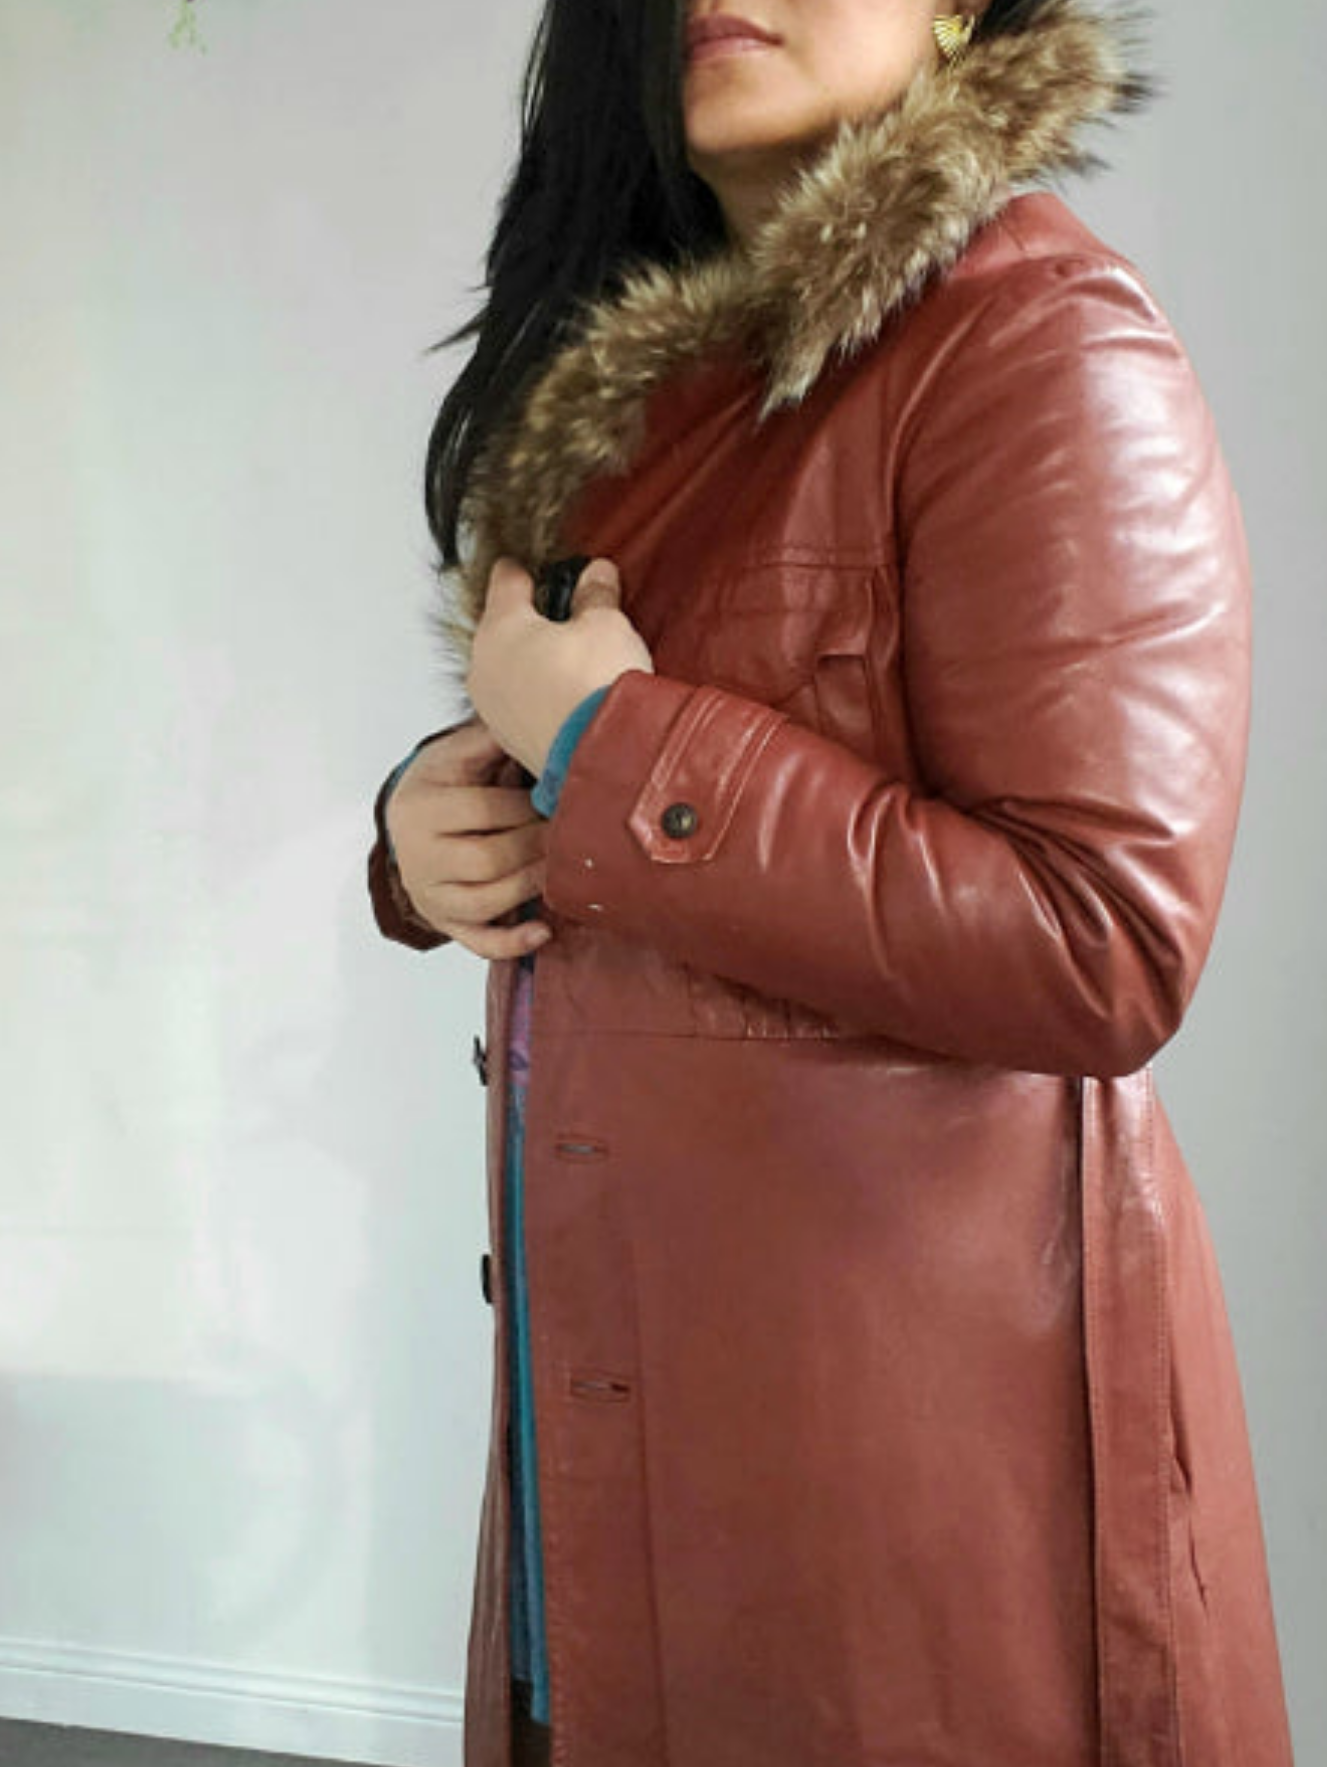 Vintage Winnipeg Leather Trench with Raccoon Fur Trim